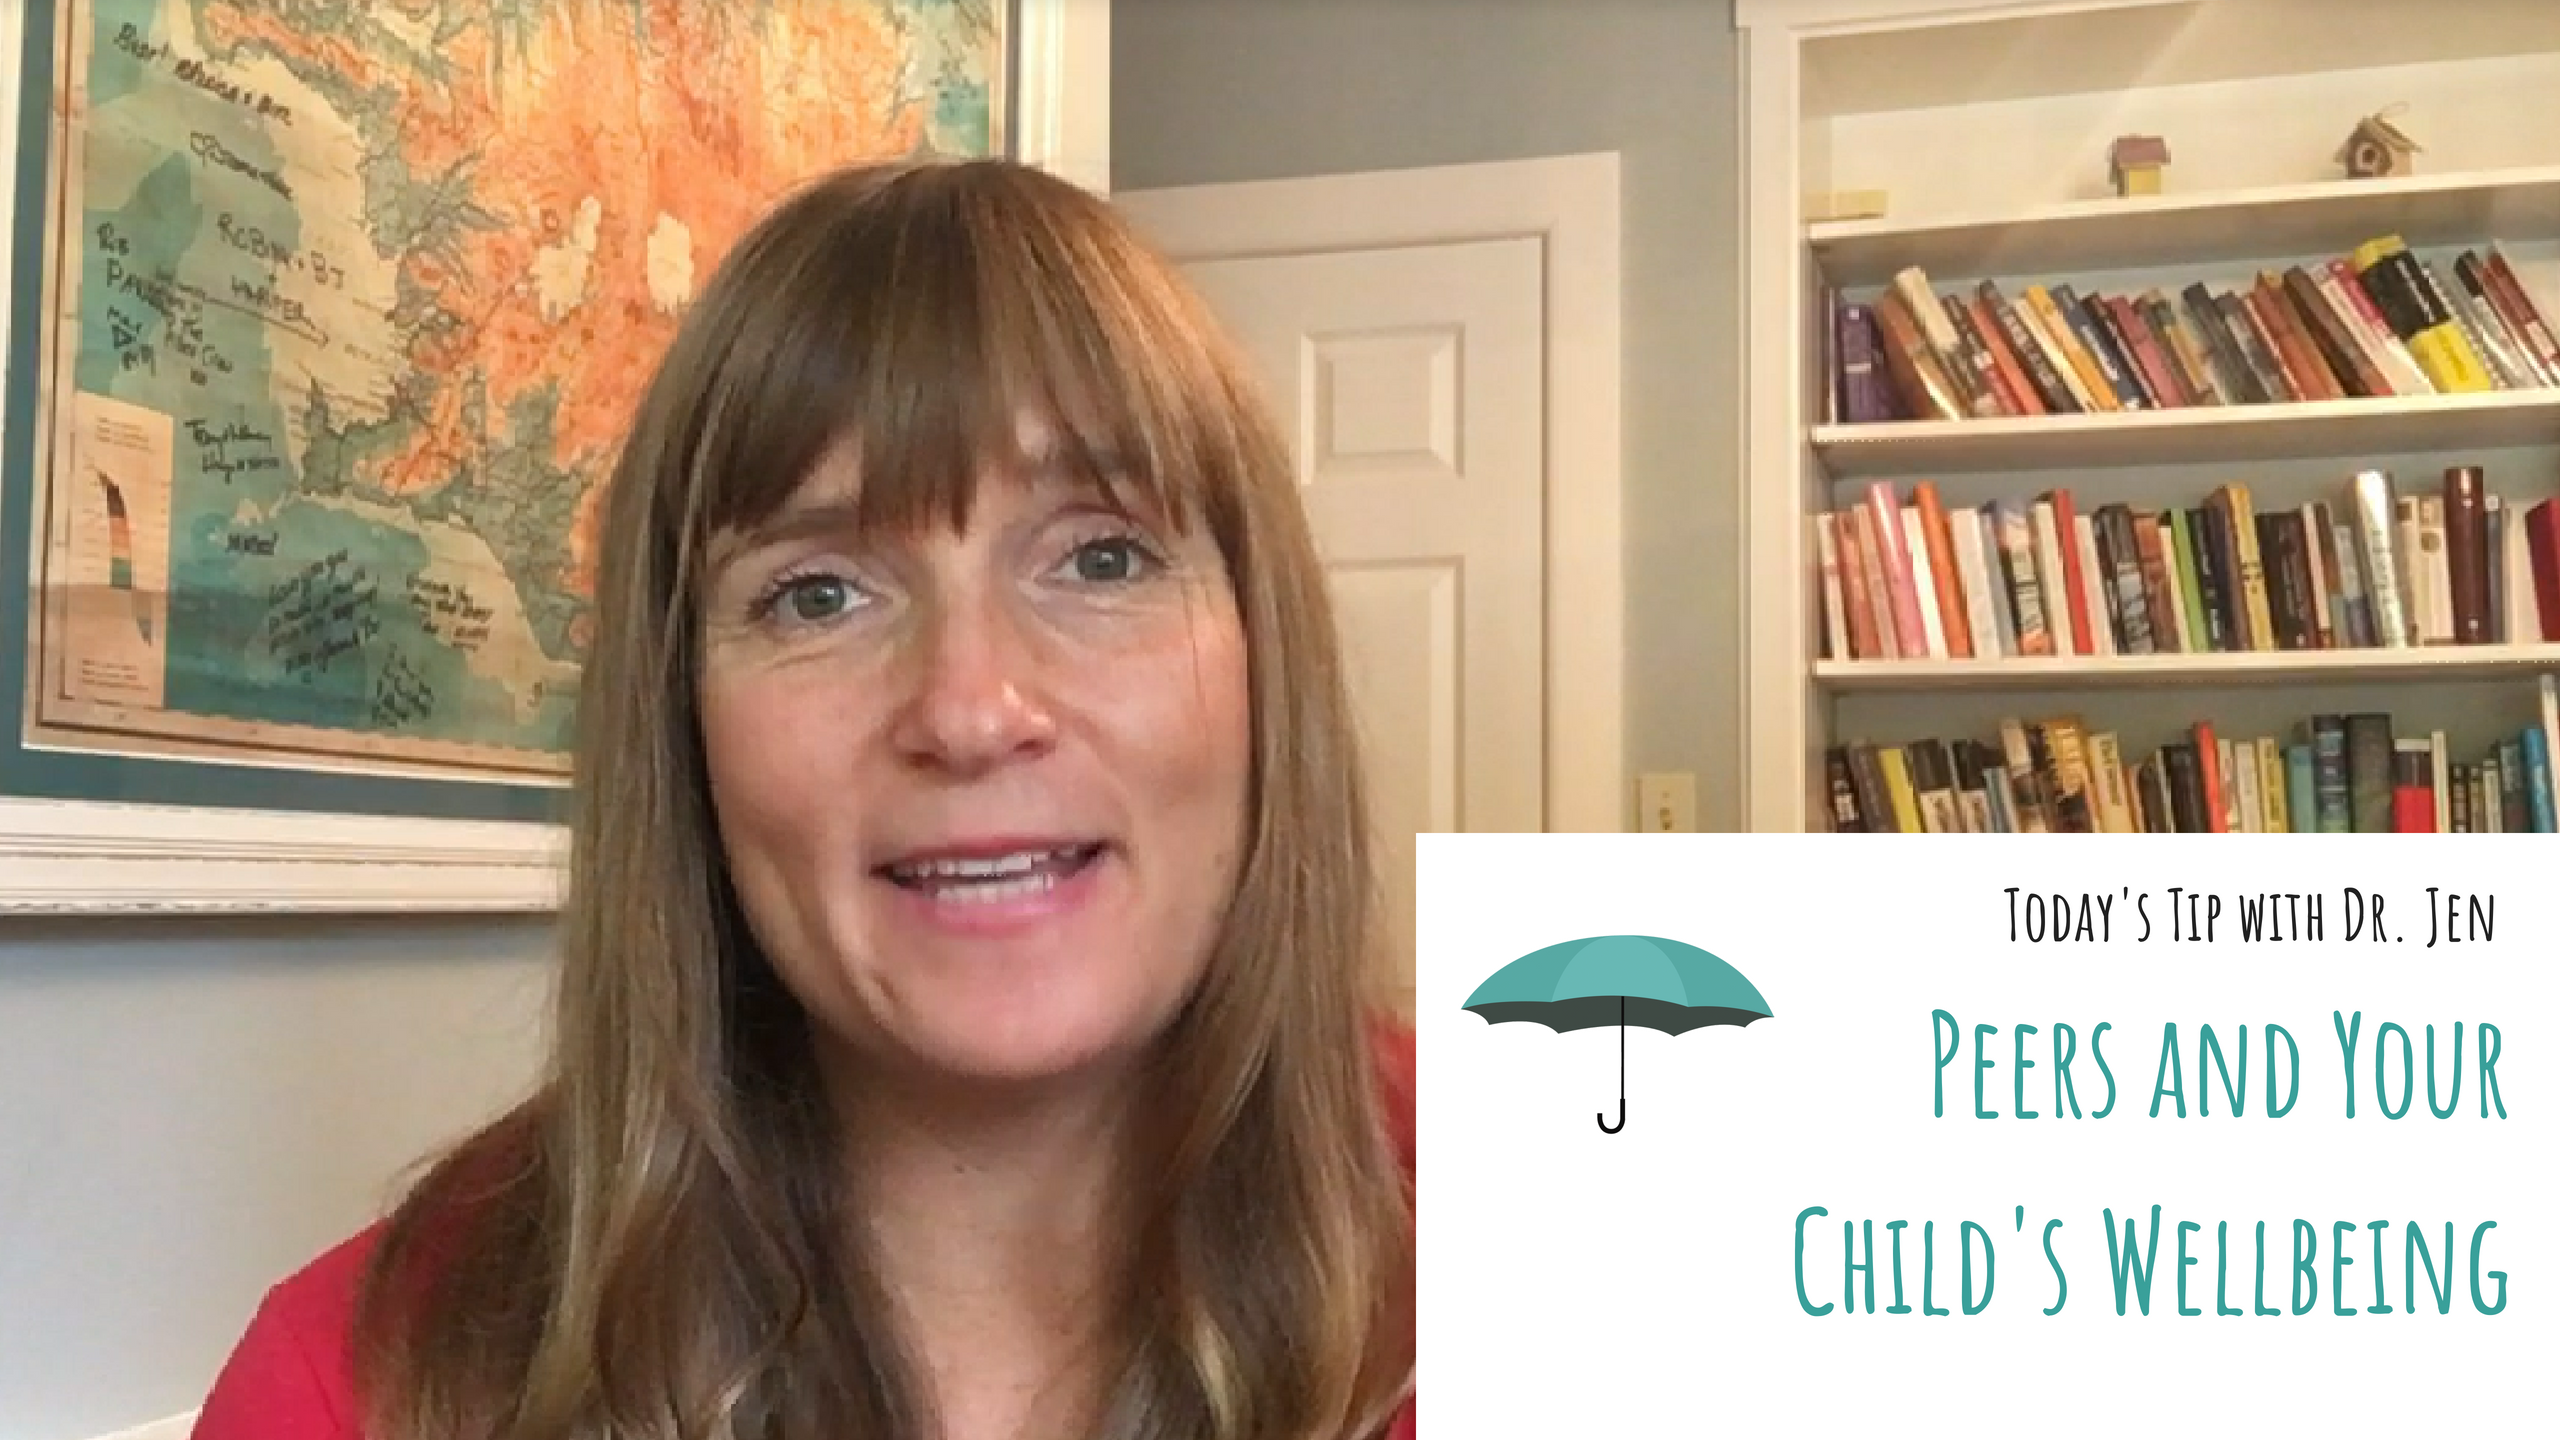 Today’s Tip with Dr. Jen: Peers and Your Child’s Wellbeing